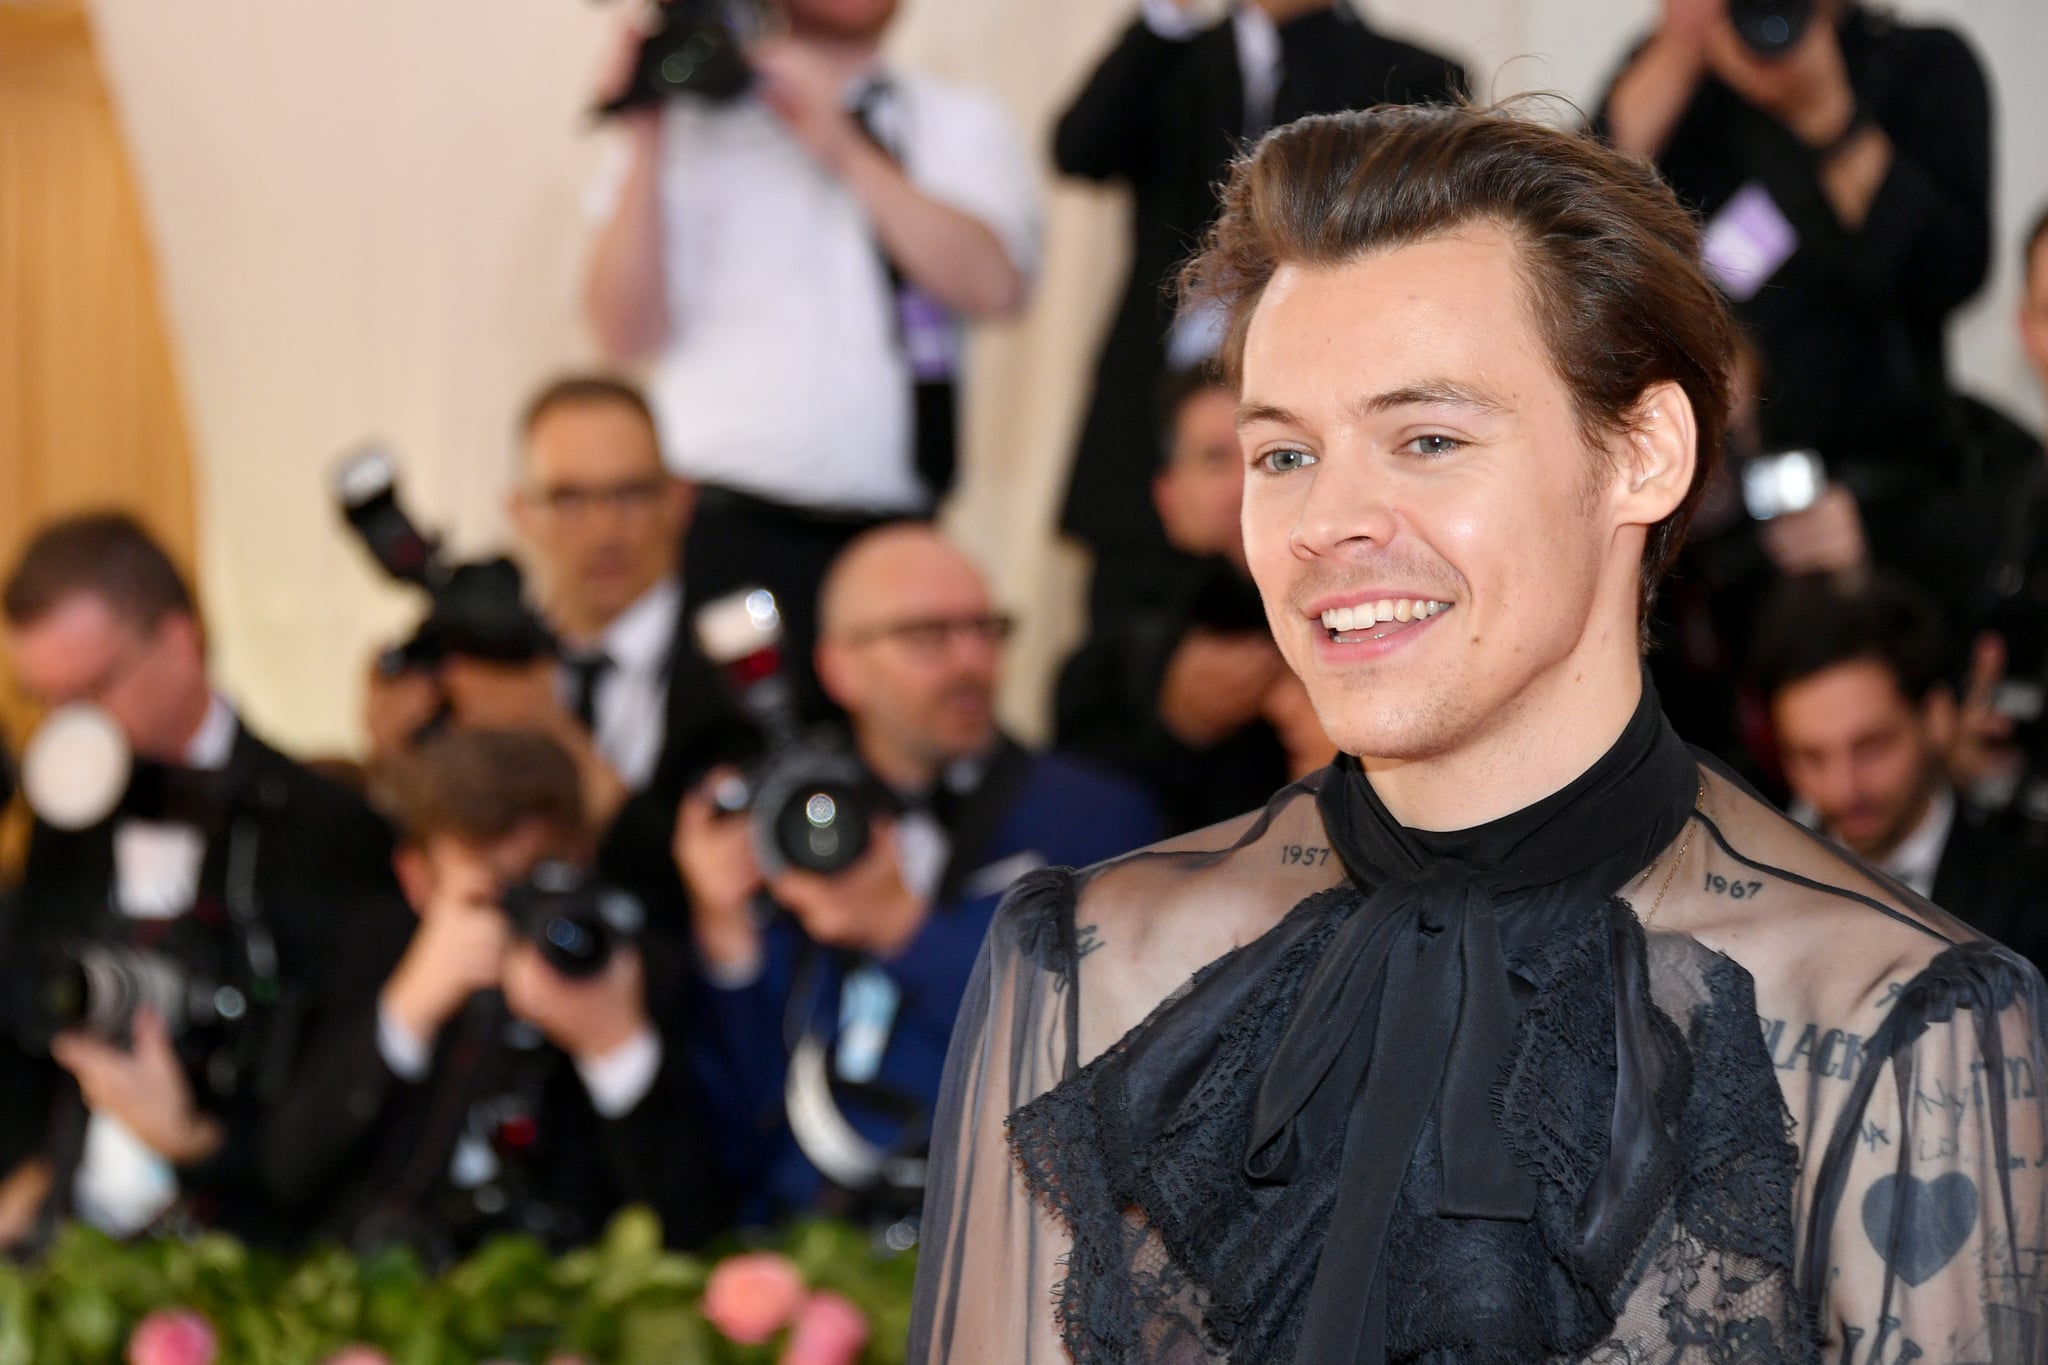 NEW YORK, NEW YORK - MAY 06: Harry Styles attends The 2019 Met Gala Celebrating Camp: Notes on Fashion at Metropolitan Museum of Art on May 06, 2019 in New York City. (Photo by Dia Dipasupil/FilmMagic)